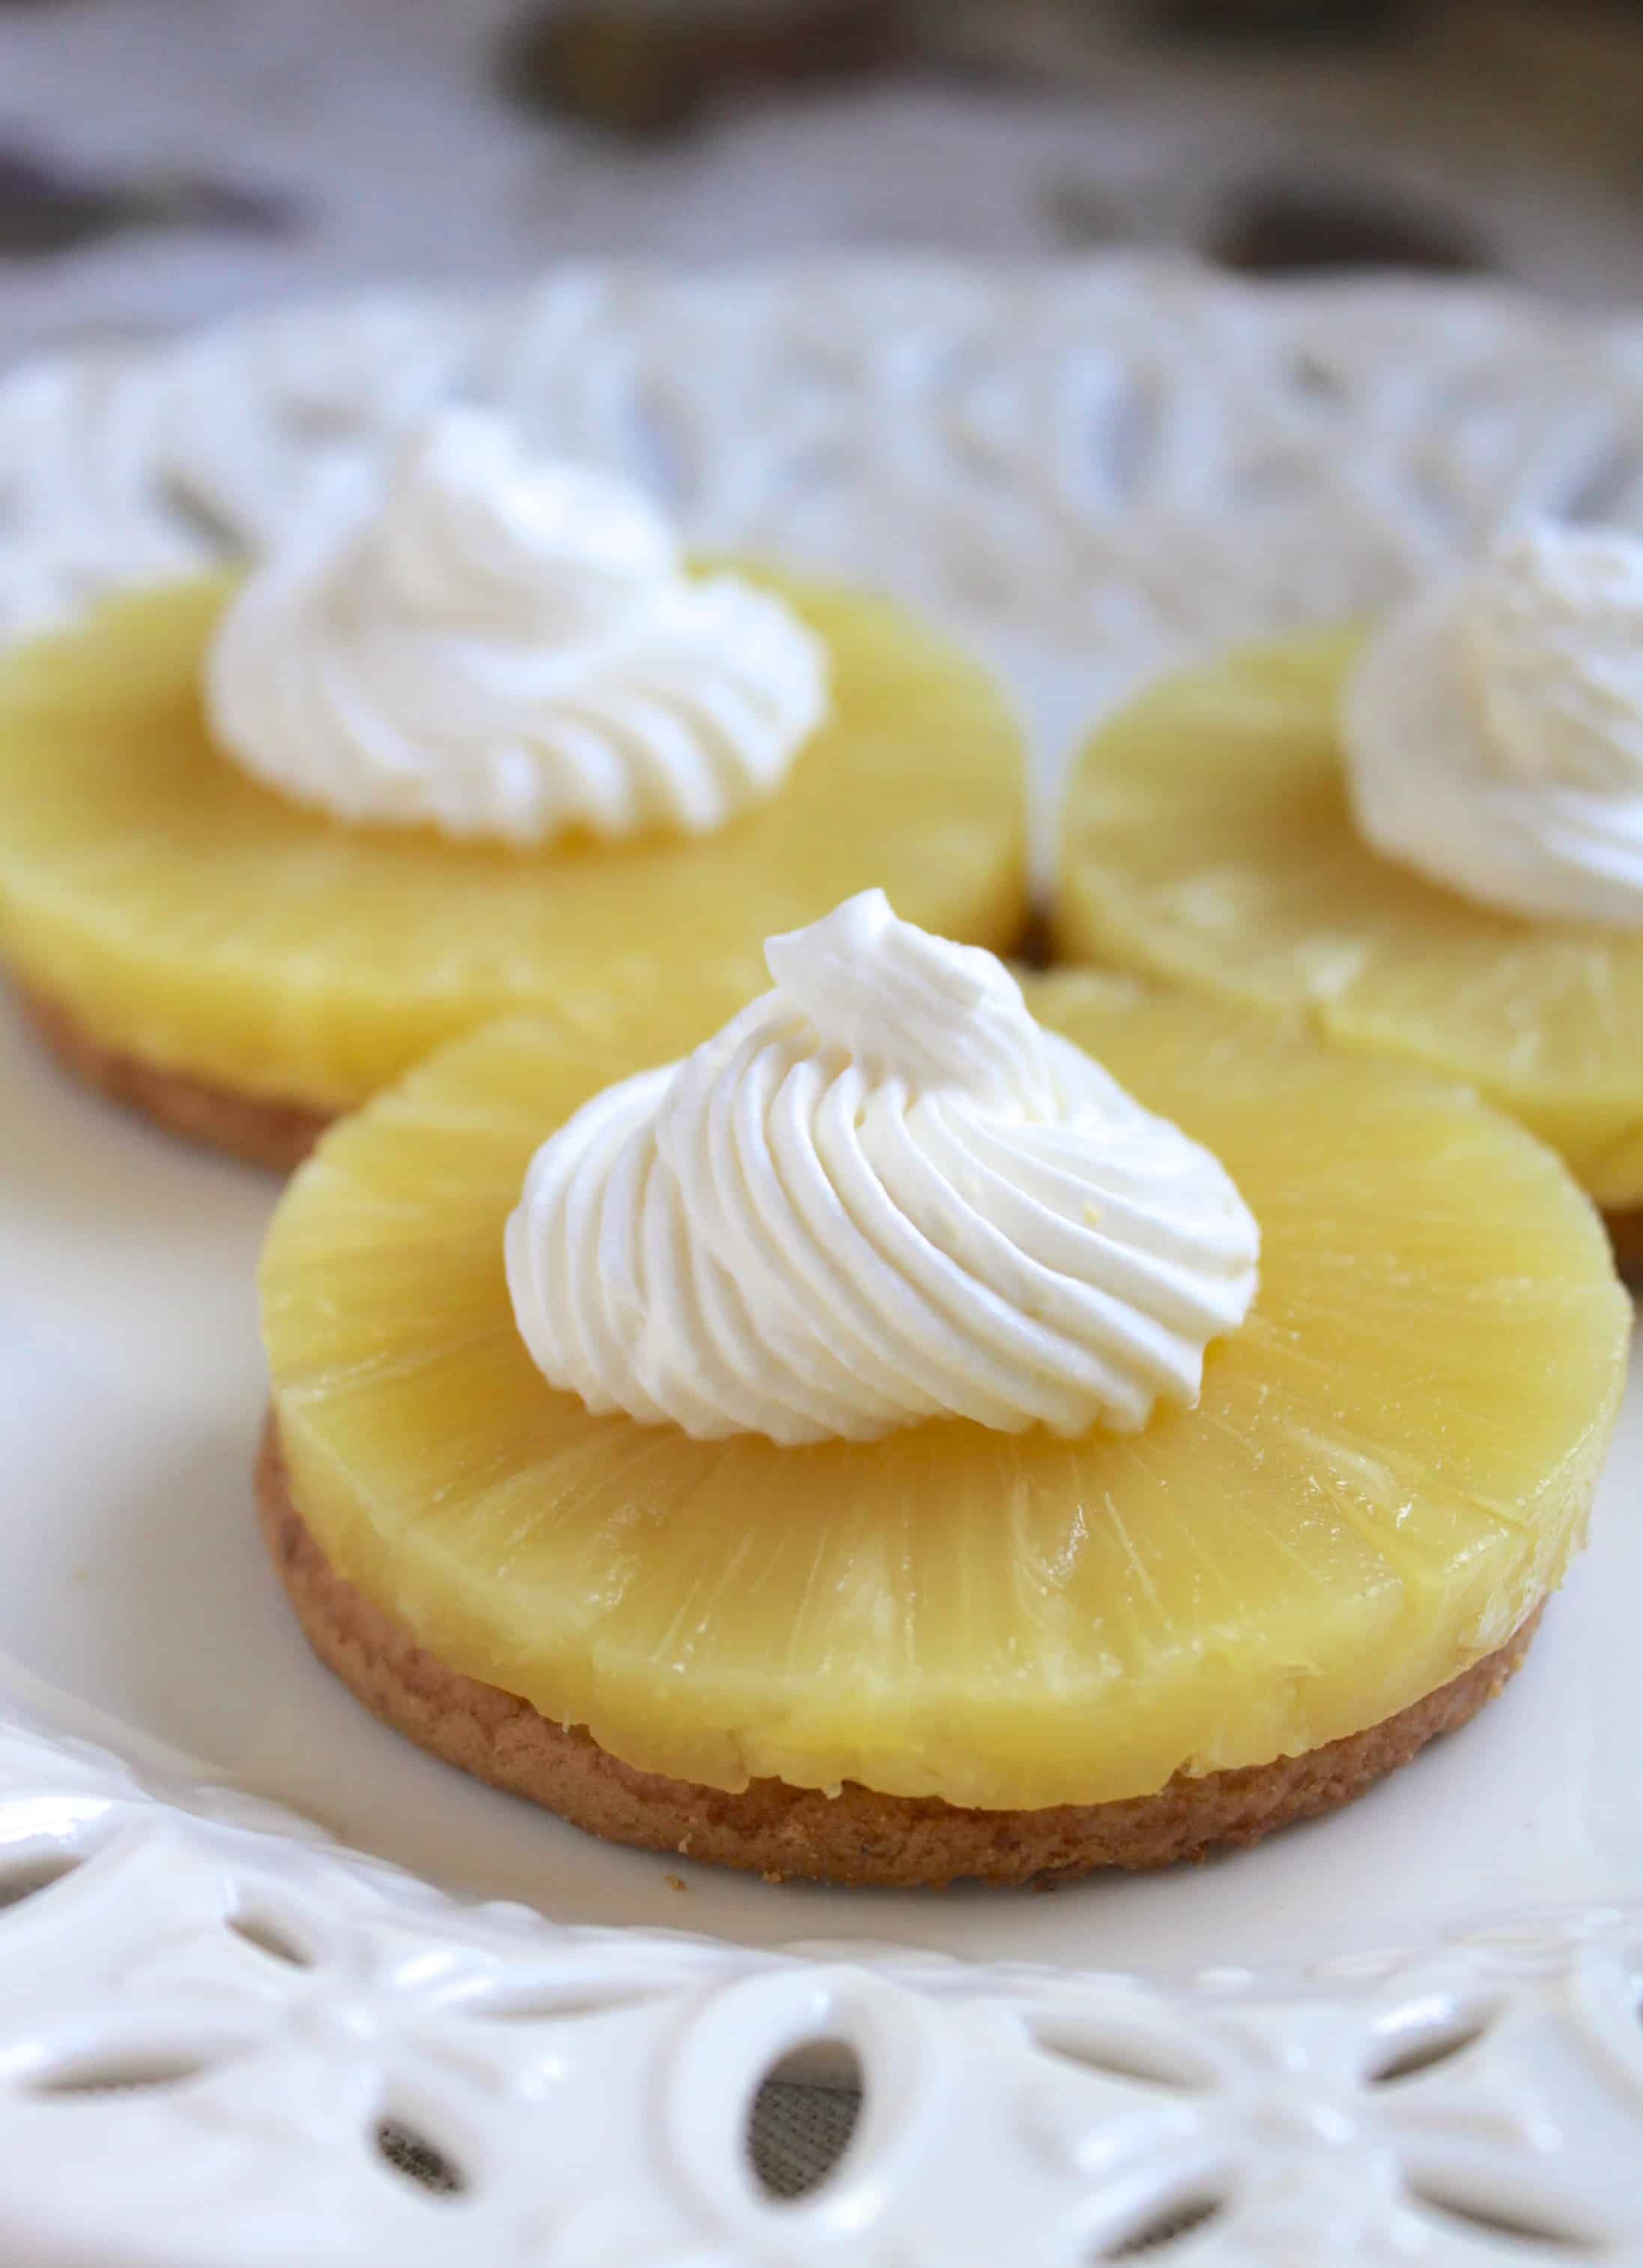 No-Bake Pineapple and Cream Dessert (Made with Cookies)